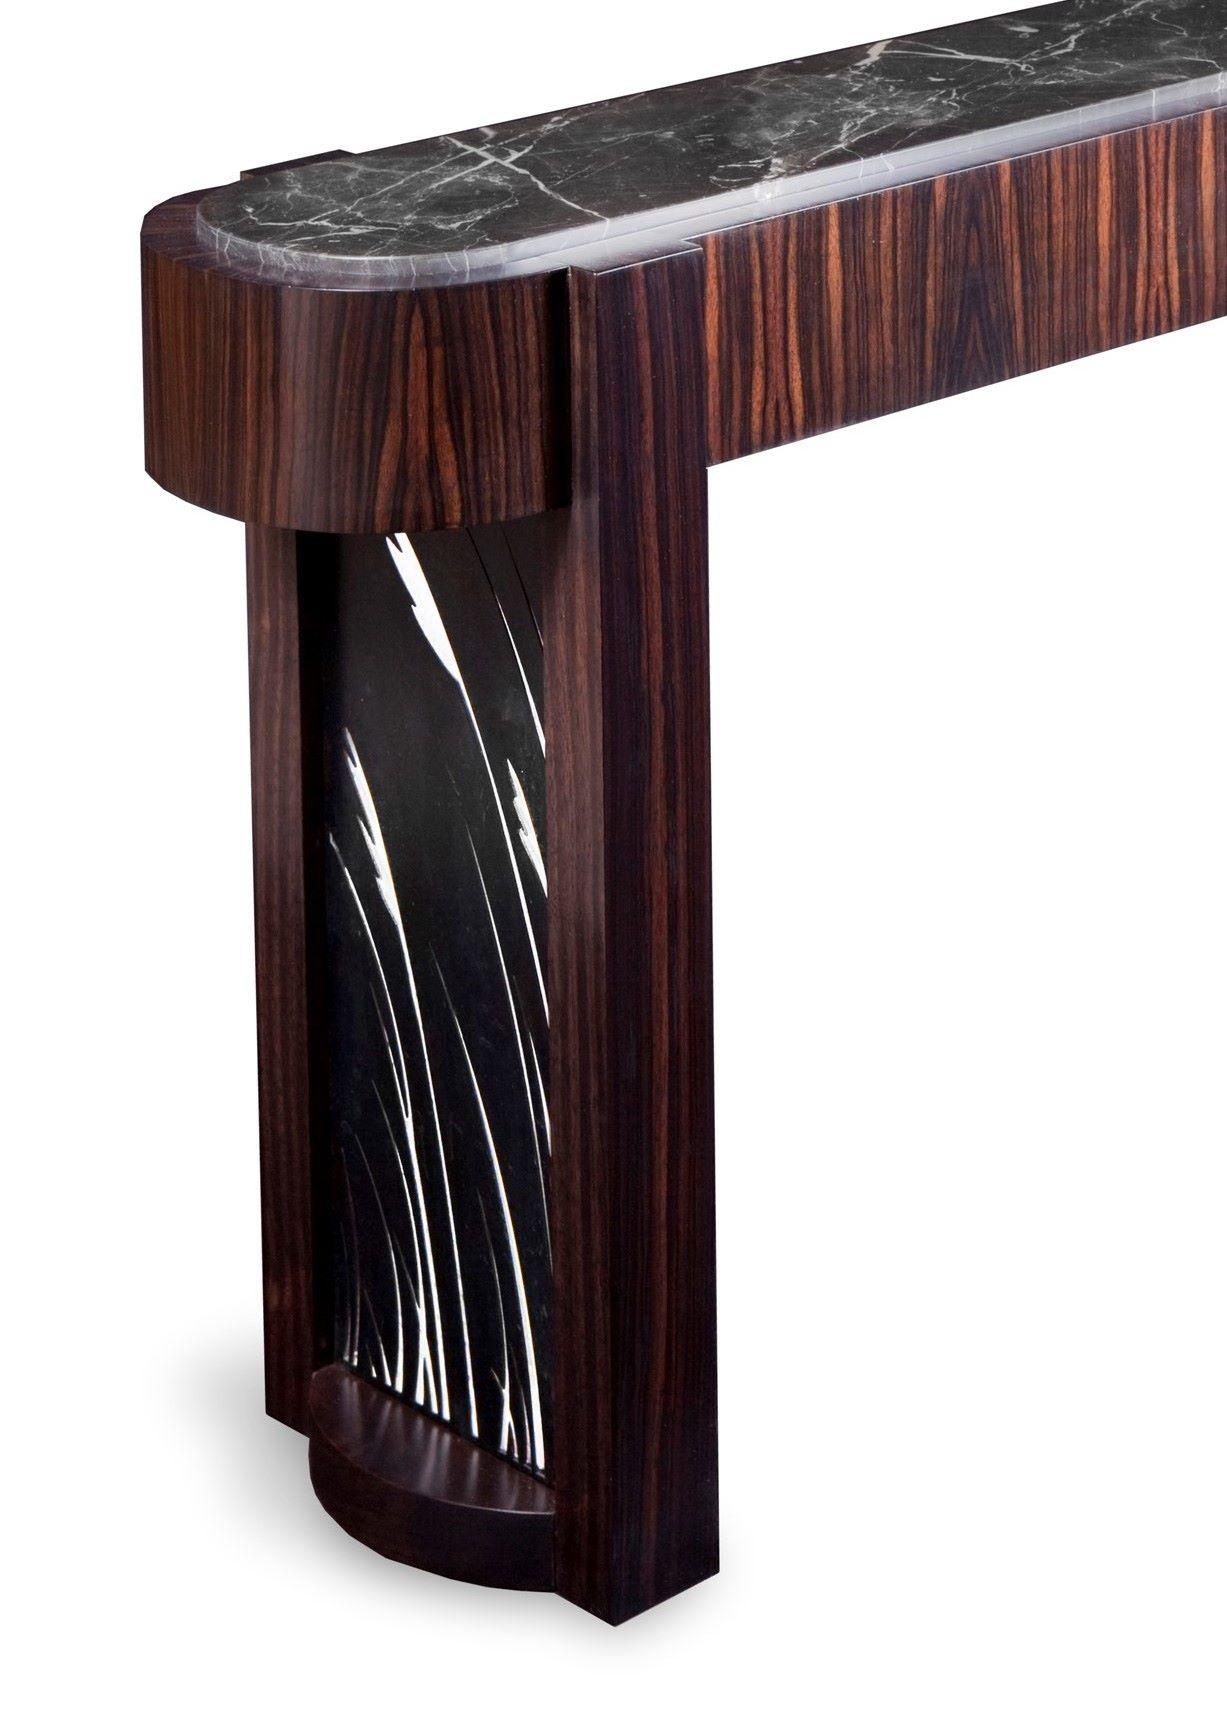 Sea grass console table
Deco influenced console table
Shown in Macassar ebony, blackened steel, and absolute black granite
Customize-able for wood type, stone, and metal
(blackened steel, bronze and stainless steel).

 